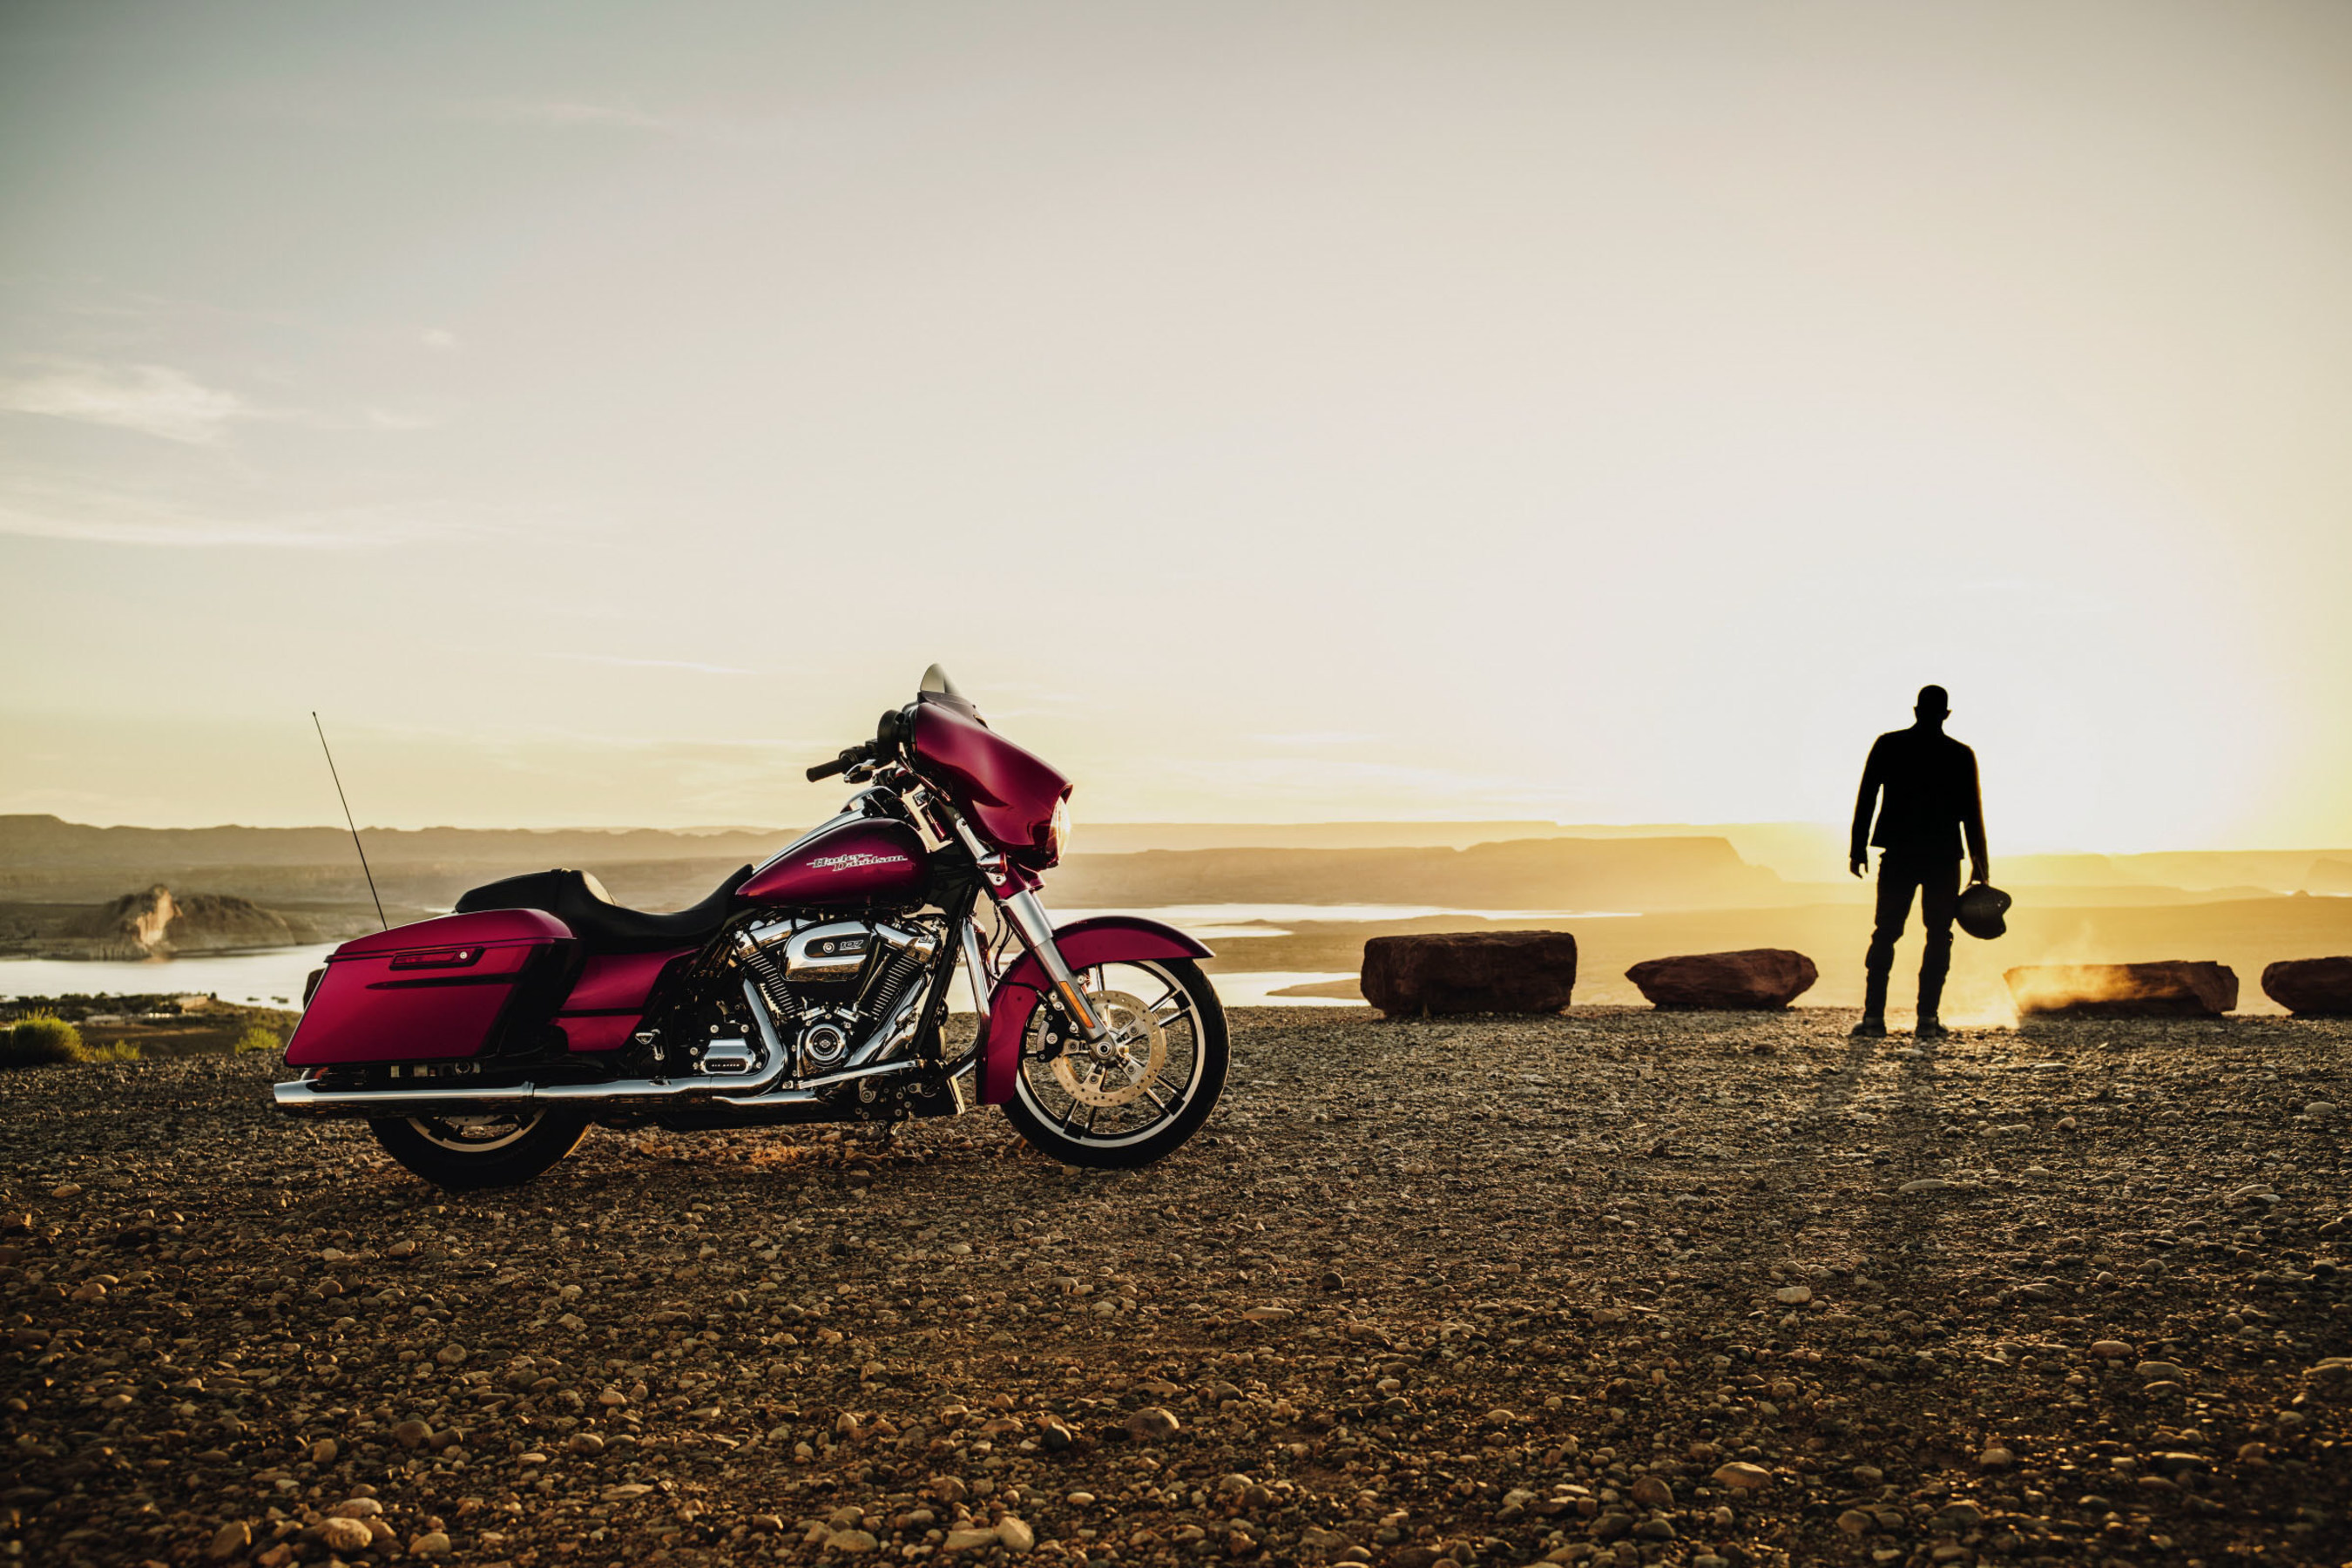 Equipped with the new Milwaukee-Eight engine and new front and rear suspension, Harley-Davidson's 2017 Touring motorcycles like this Street Glide Special model are the company's most powerful, most responsive and most comfortable Touring motorcycles ever.